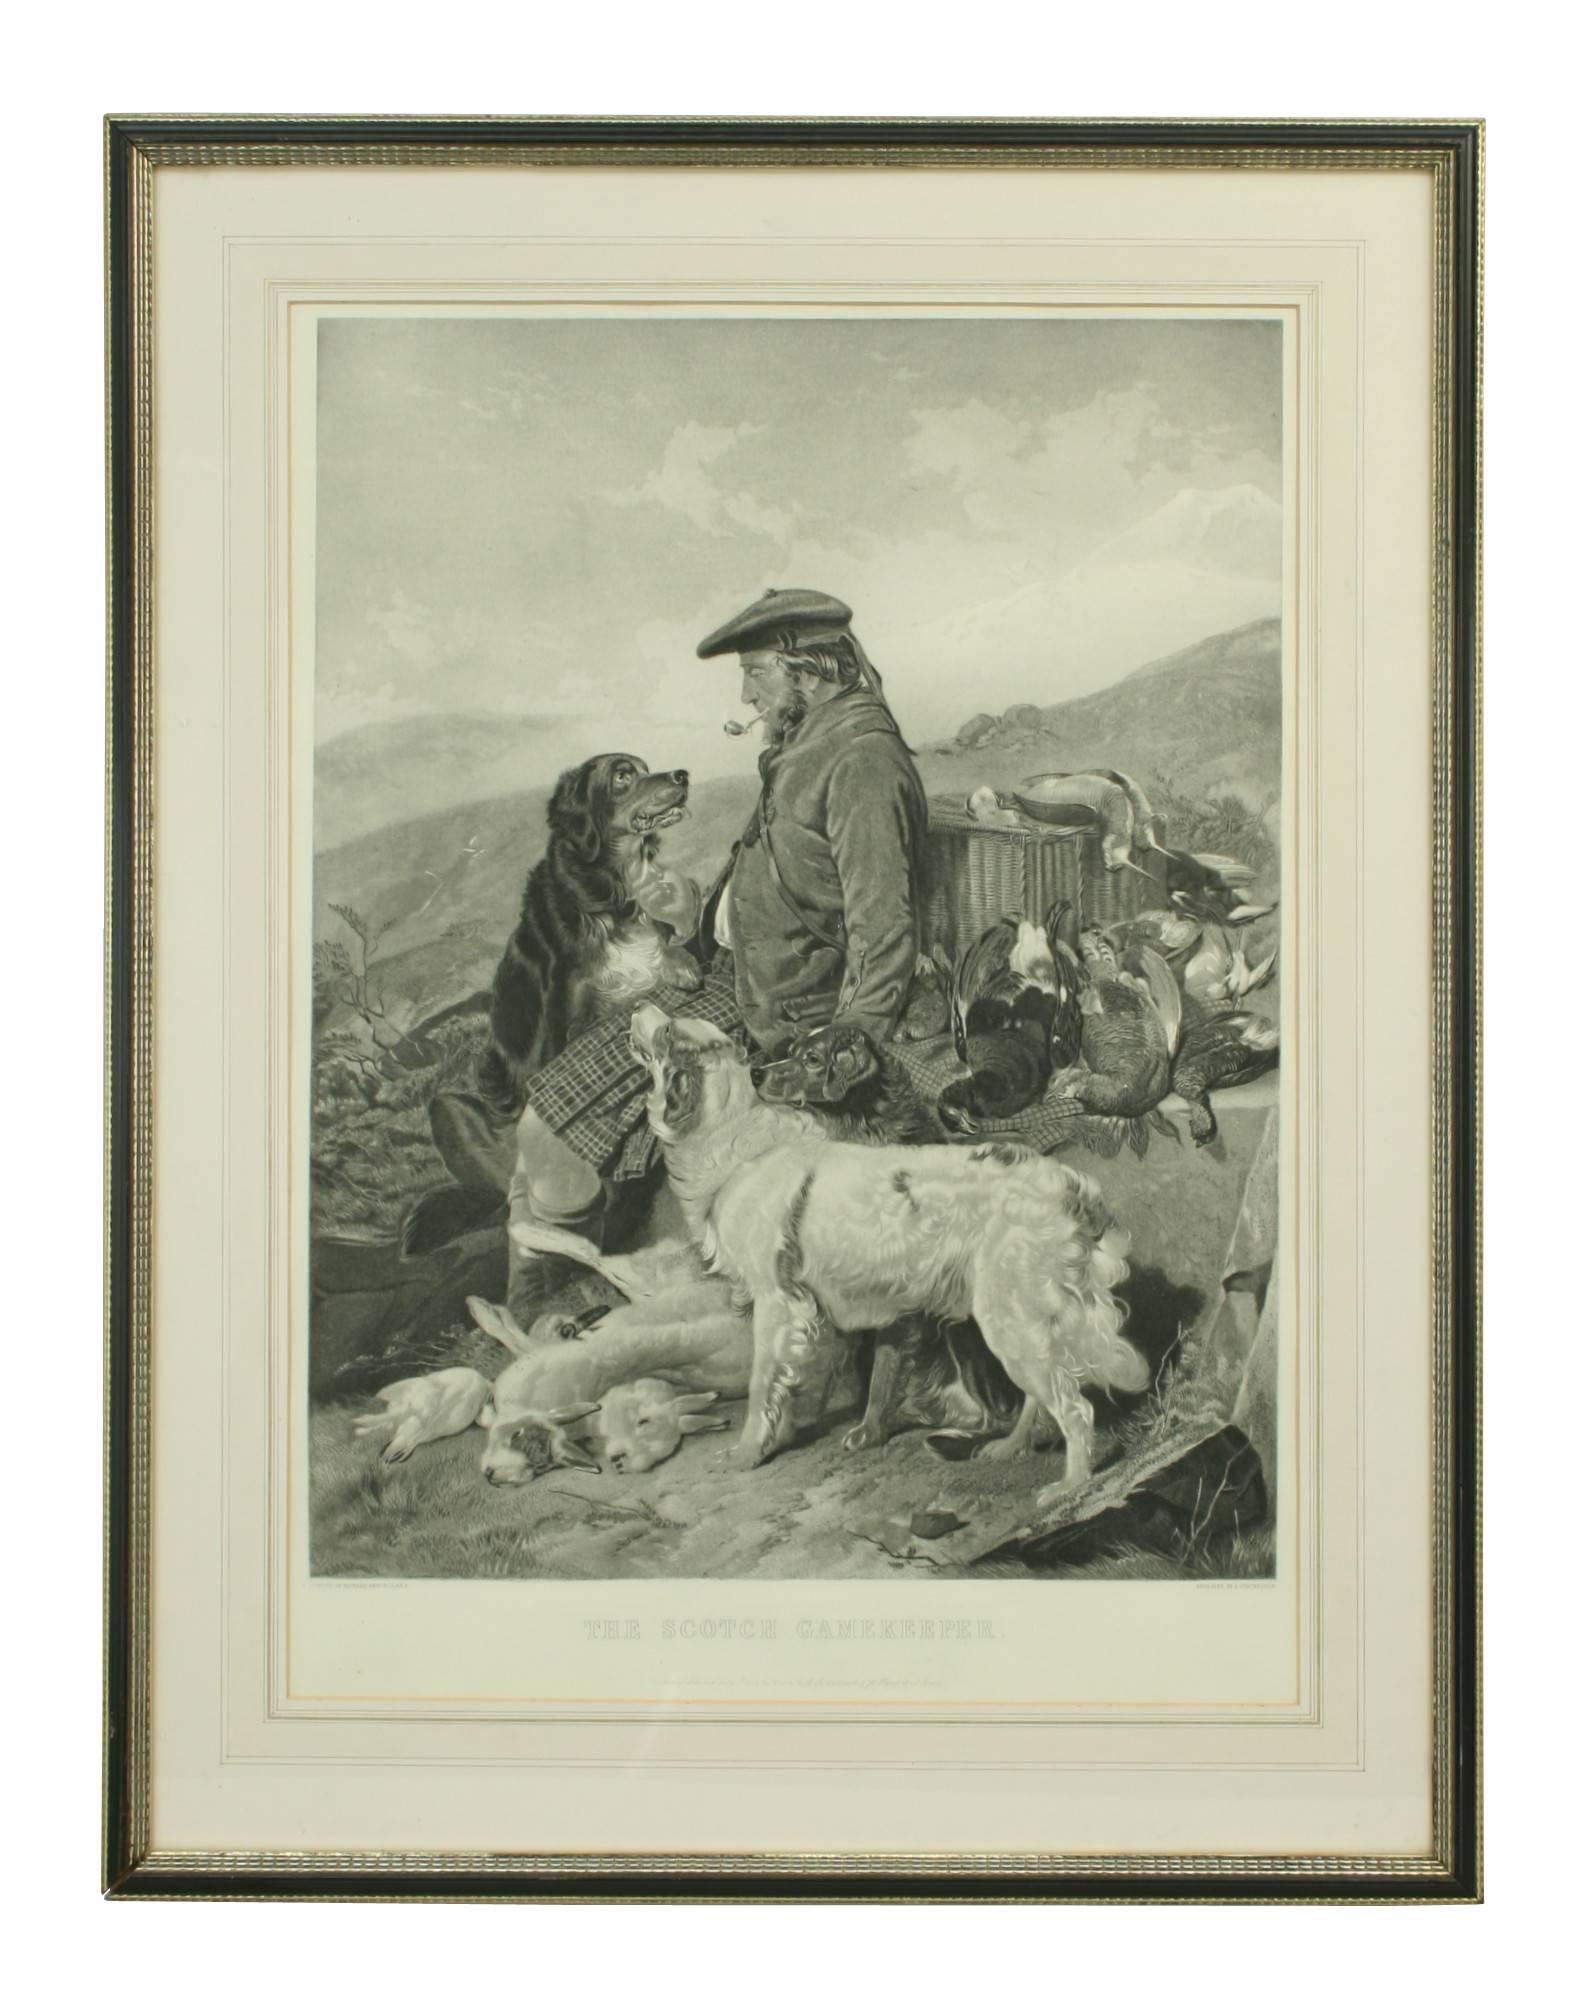 British Hunting Shooting Pictures, English and Scottish Gamekeepers